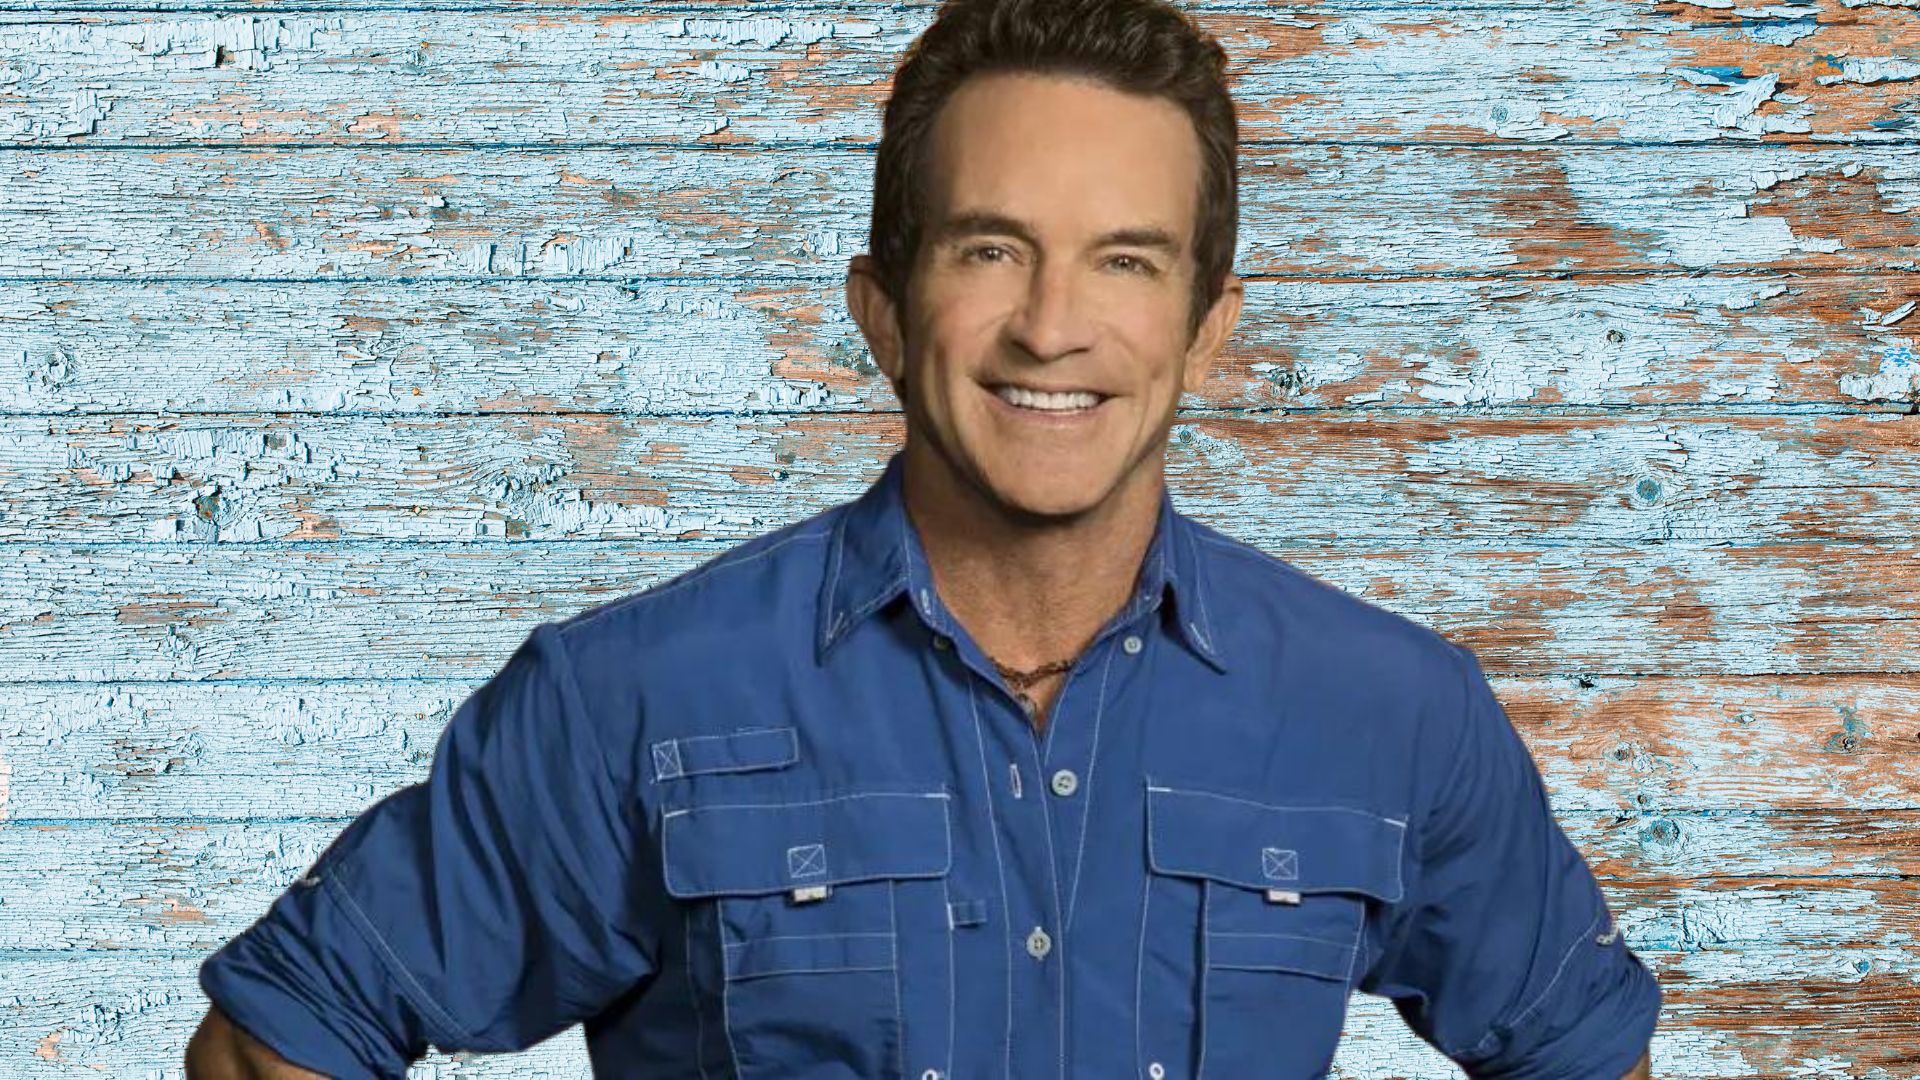 Full Story On Jeff Probst's Weight Loss - How Much Weight Did The Survivor Host Lose